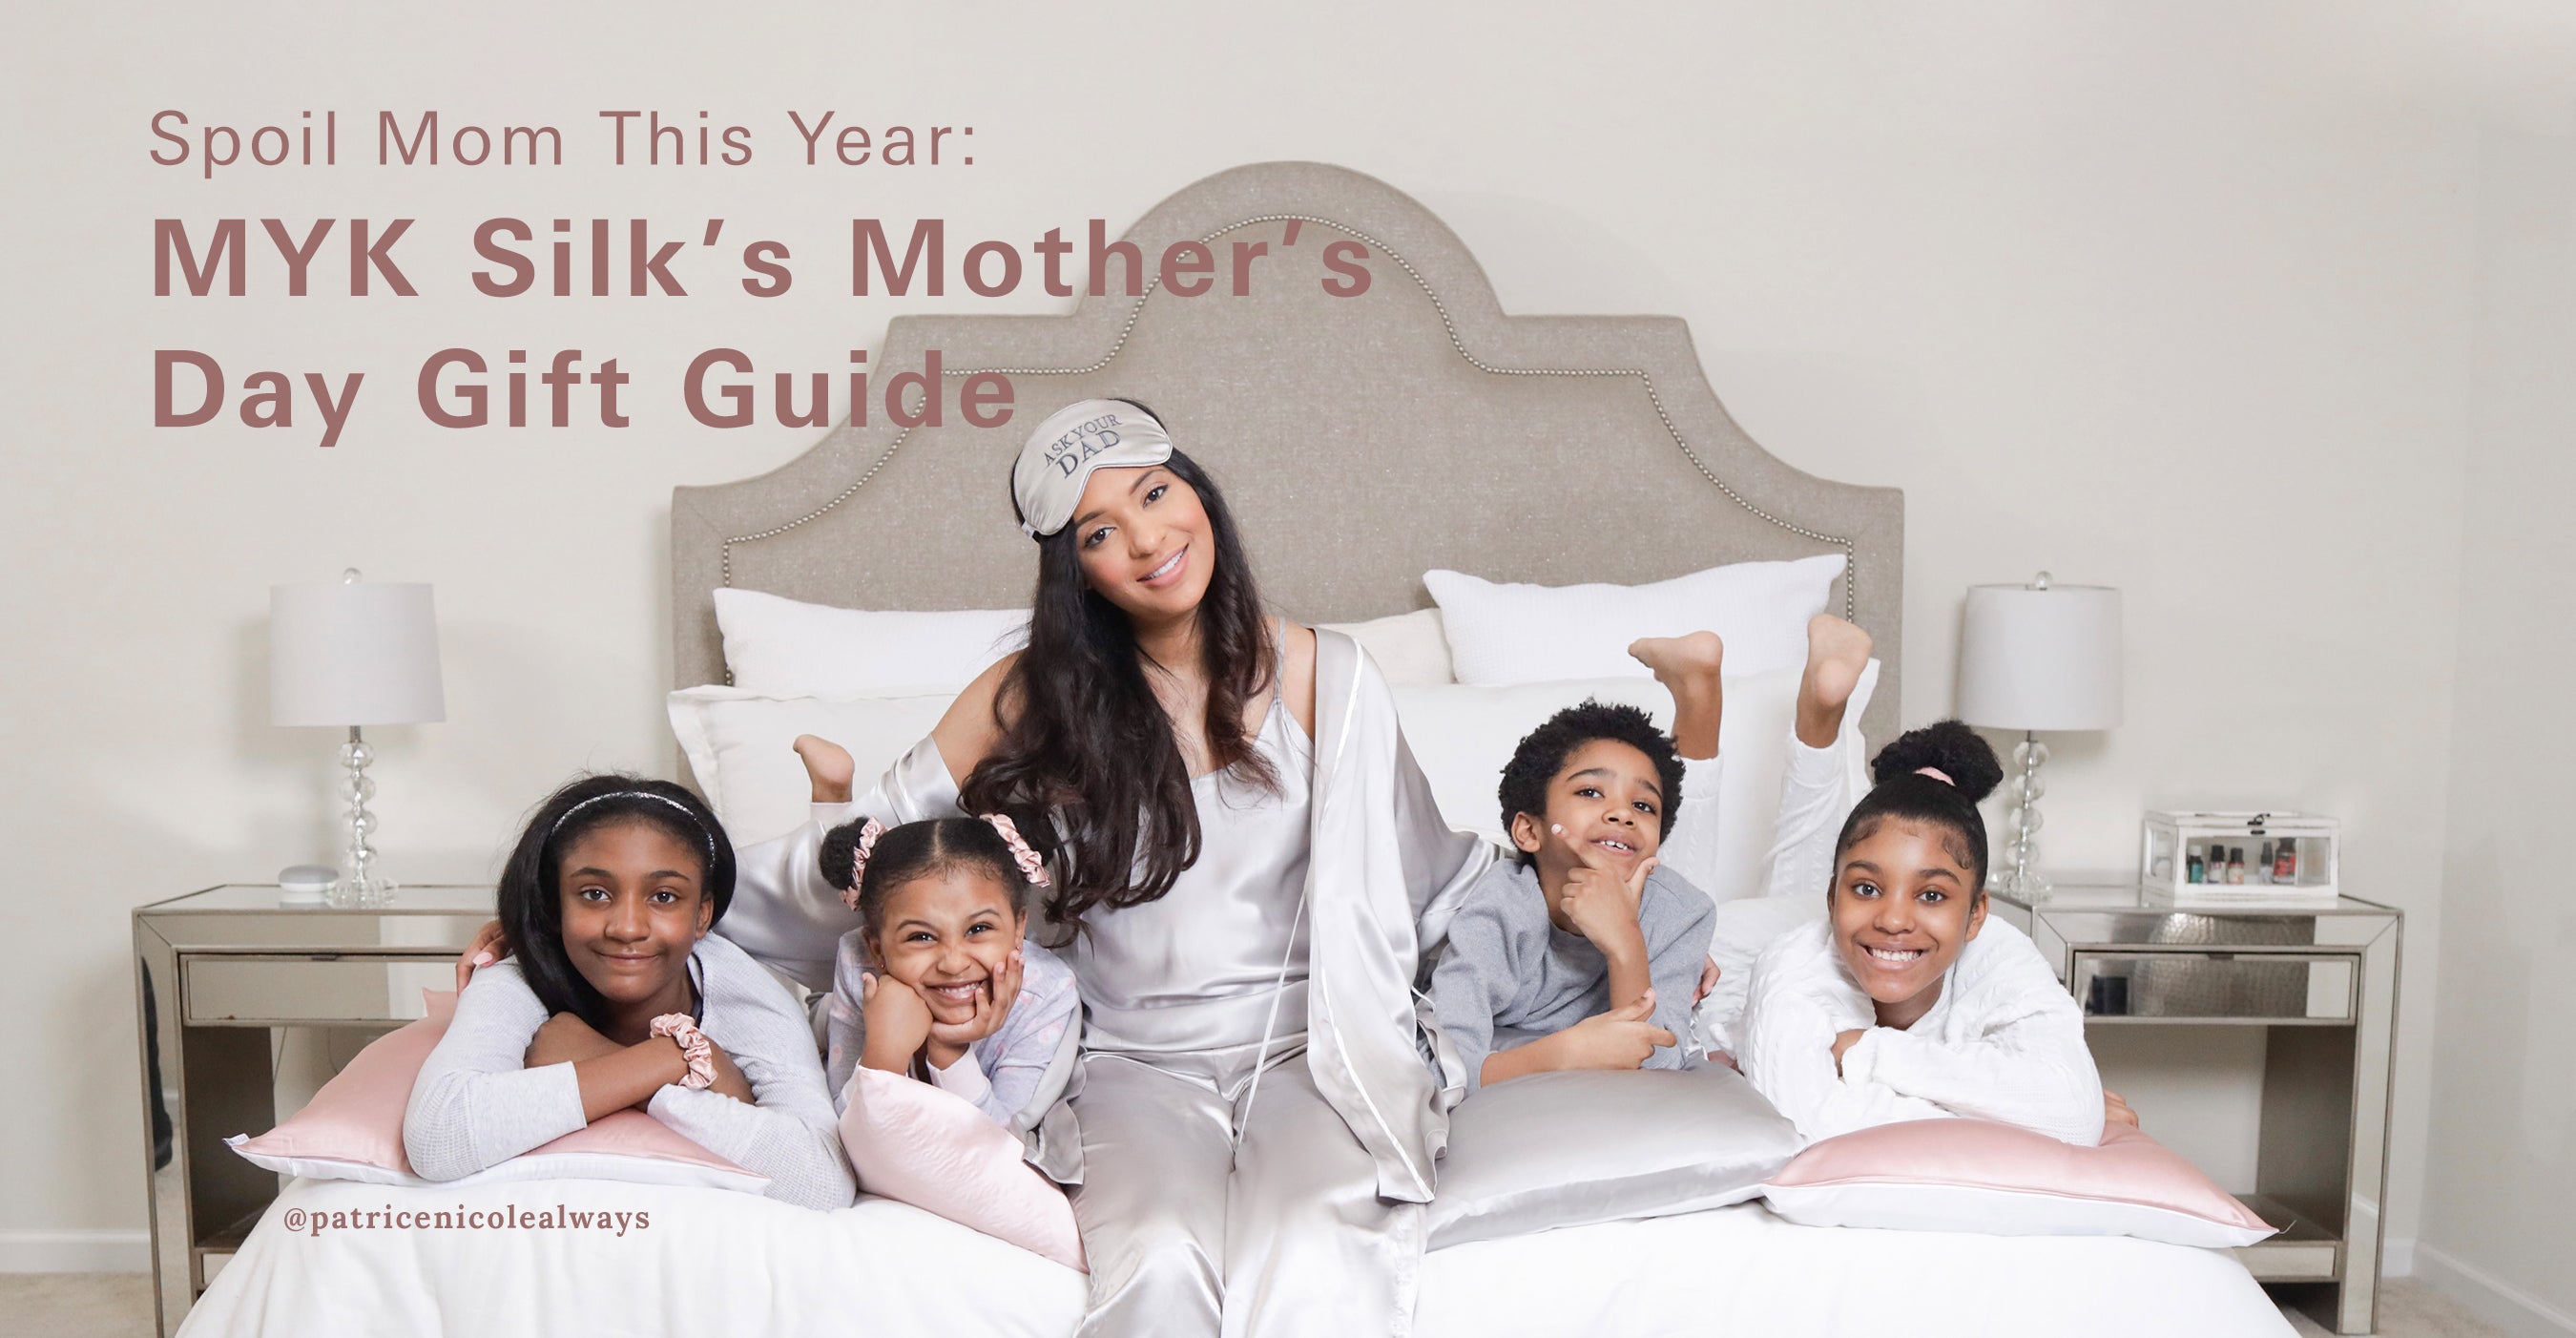 Spoil Mom This Year: MYK Silk’s Mother’s Day Gift Guide